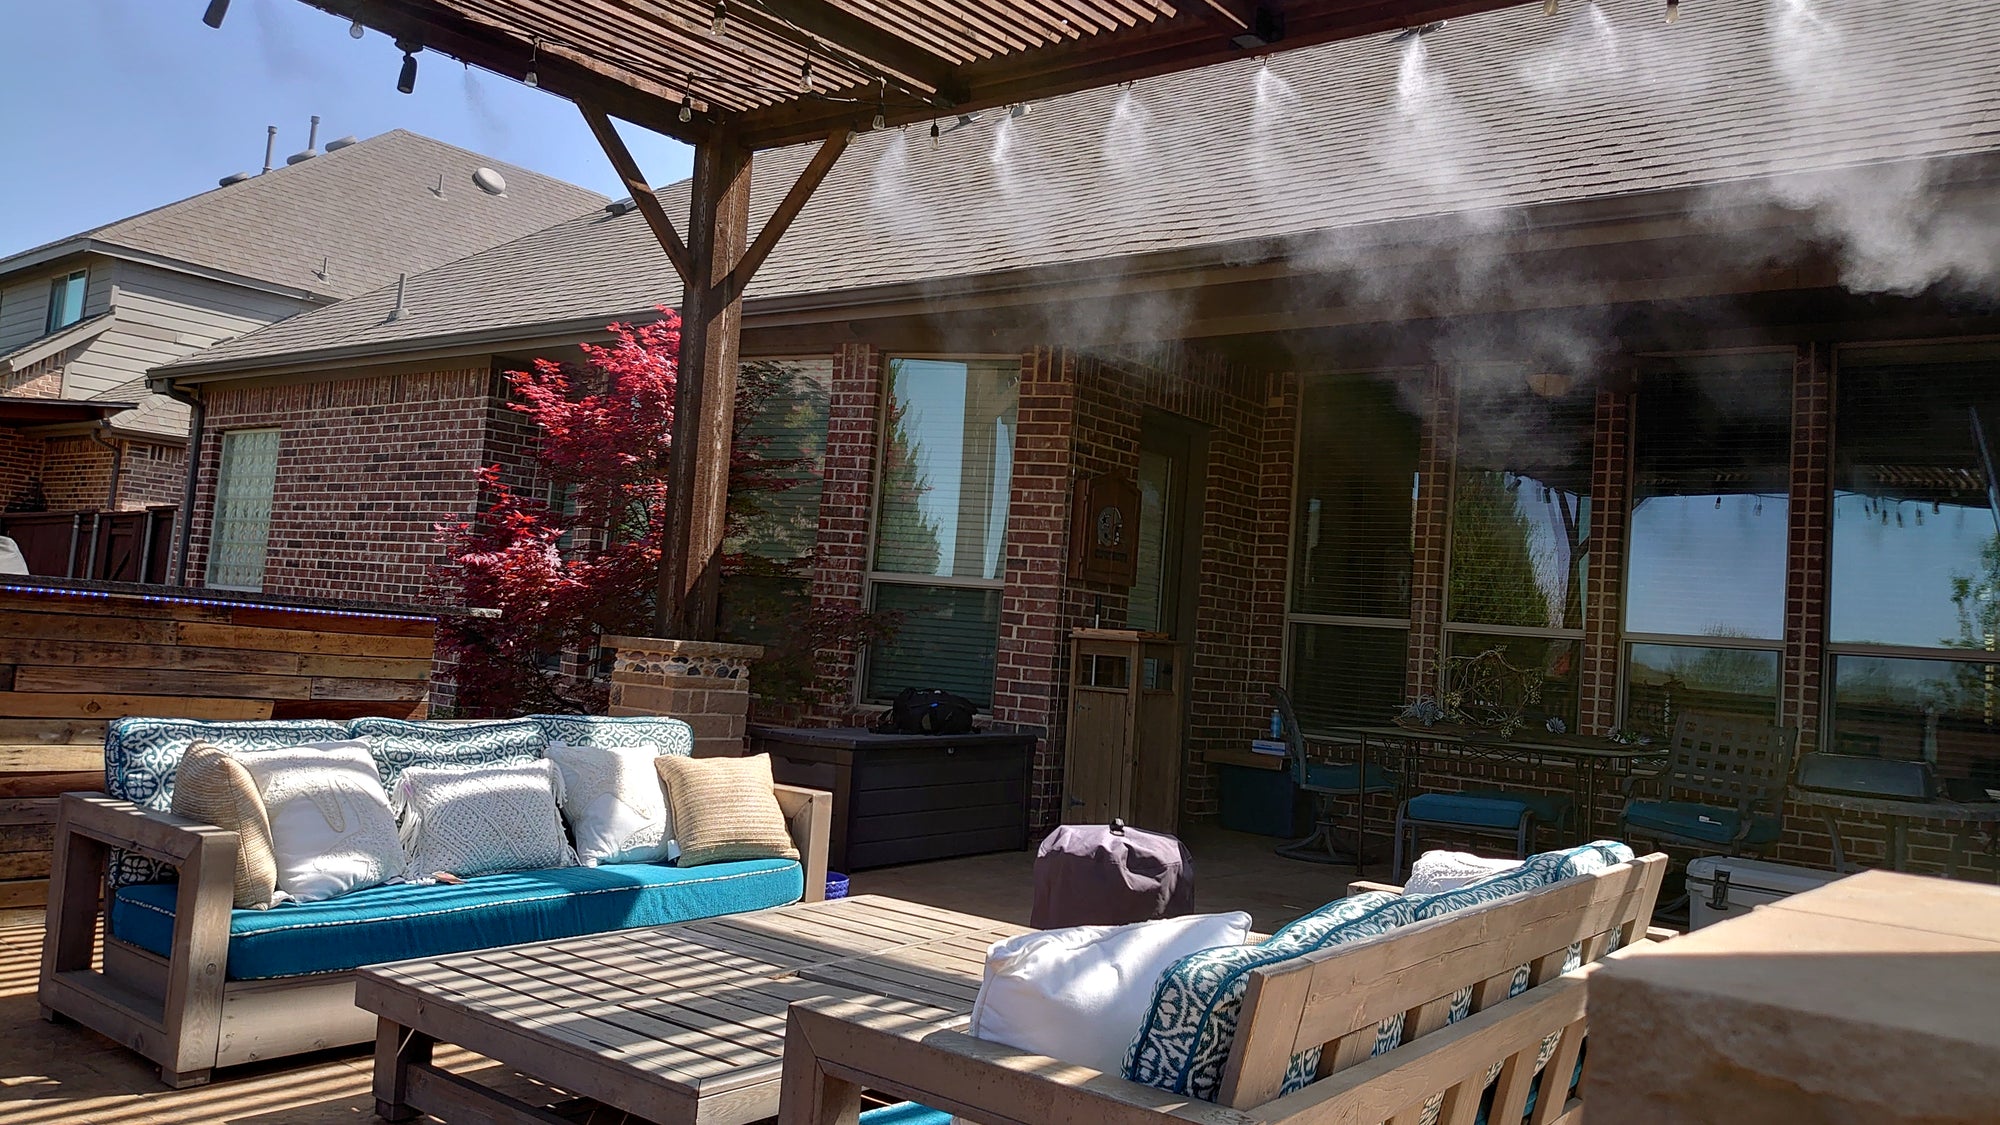 The right misting system works in high humidity